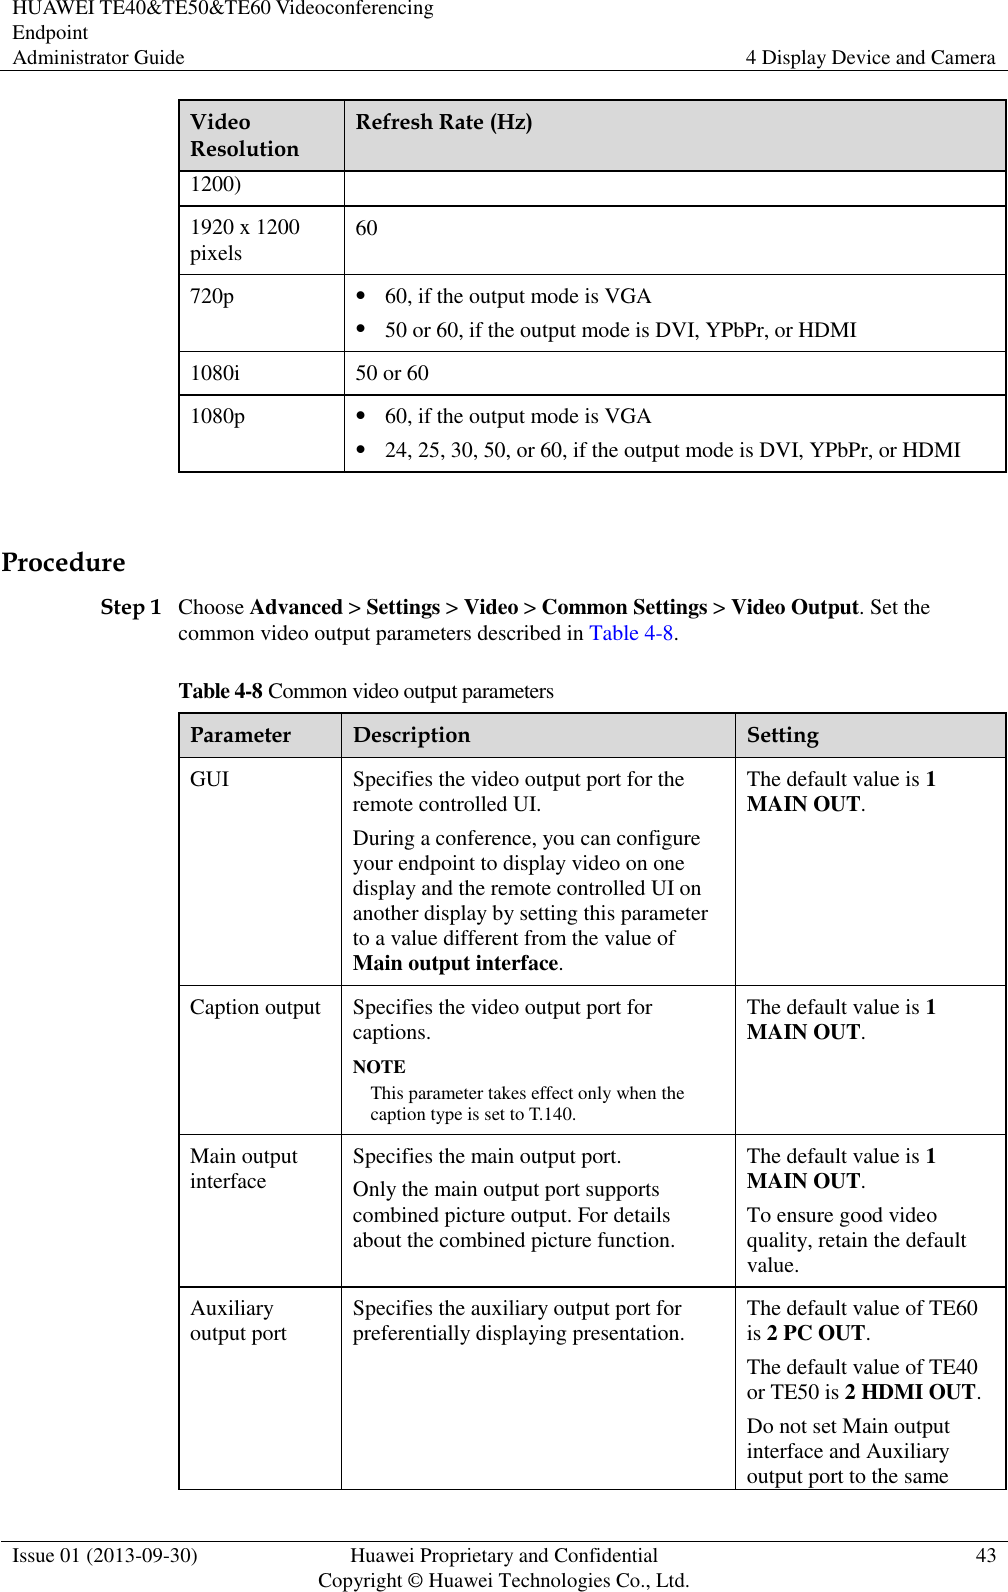 HUAWEI TE40&amp;TE50&amp;TE60 Videoconferencing Endpoint Administrator Guide 4 Display Device and Camera  Issue 01 (2013-09-30) Huawei Proprietary and Confidential                                     Copyright © Huawei Technologies Co., Ltd. 43  Video Resolution Refresh Rate (Hz) 1200) 1920 x 1200 pixels 60 720p  60, if the output mode is VGA  50 or 60, if the output mode is DVI, YPbPr, or HDMI 1080i 50 or 60 1080p  60, if the output mode is VGA  24, 25, 30, 50, or 60, if the output mode is DVI, YPbPr, or HDMI  Procedure Step 1 Choose Advanced &gt; Settings &gt; Video &gt; Common Settings &gt; Video Output. Set the common video output parameters described in Table 4-8. Table 4-8 Common video output parameters Parameter Description Setting GUI Specifies the video output port for the remote controlled UI. During a conference, you can configure your endpoint to display video on one display and the remote controlled UI on another display by setting this parameter to a value different from the value of Main output interface. The default value is 1 MAIN OUT. Caption output Specifies the video output port for captions. NOTE This parameter takes effect only when the caption type is set to T.140. The default value is 1 MAIN OUT. Main output interface Specifies the main output port. Only the main output port supports combined picture output. For details about the combined picture function. The default value is 1 MAIN OUT. To ensure good video quality, retain the default value. Auxiliary output port Specifies the auxiliary output port for preferentially displaying presentation.   The default value of TE60 is 2 PC OUT. The default value of TE40 or TE50 is 2 HDMI OUT. Do not set Main output interface and Auxiliary output port to the same 